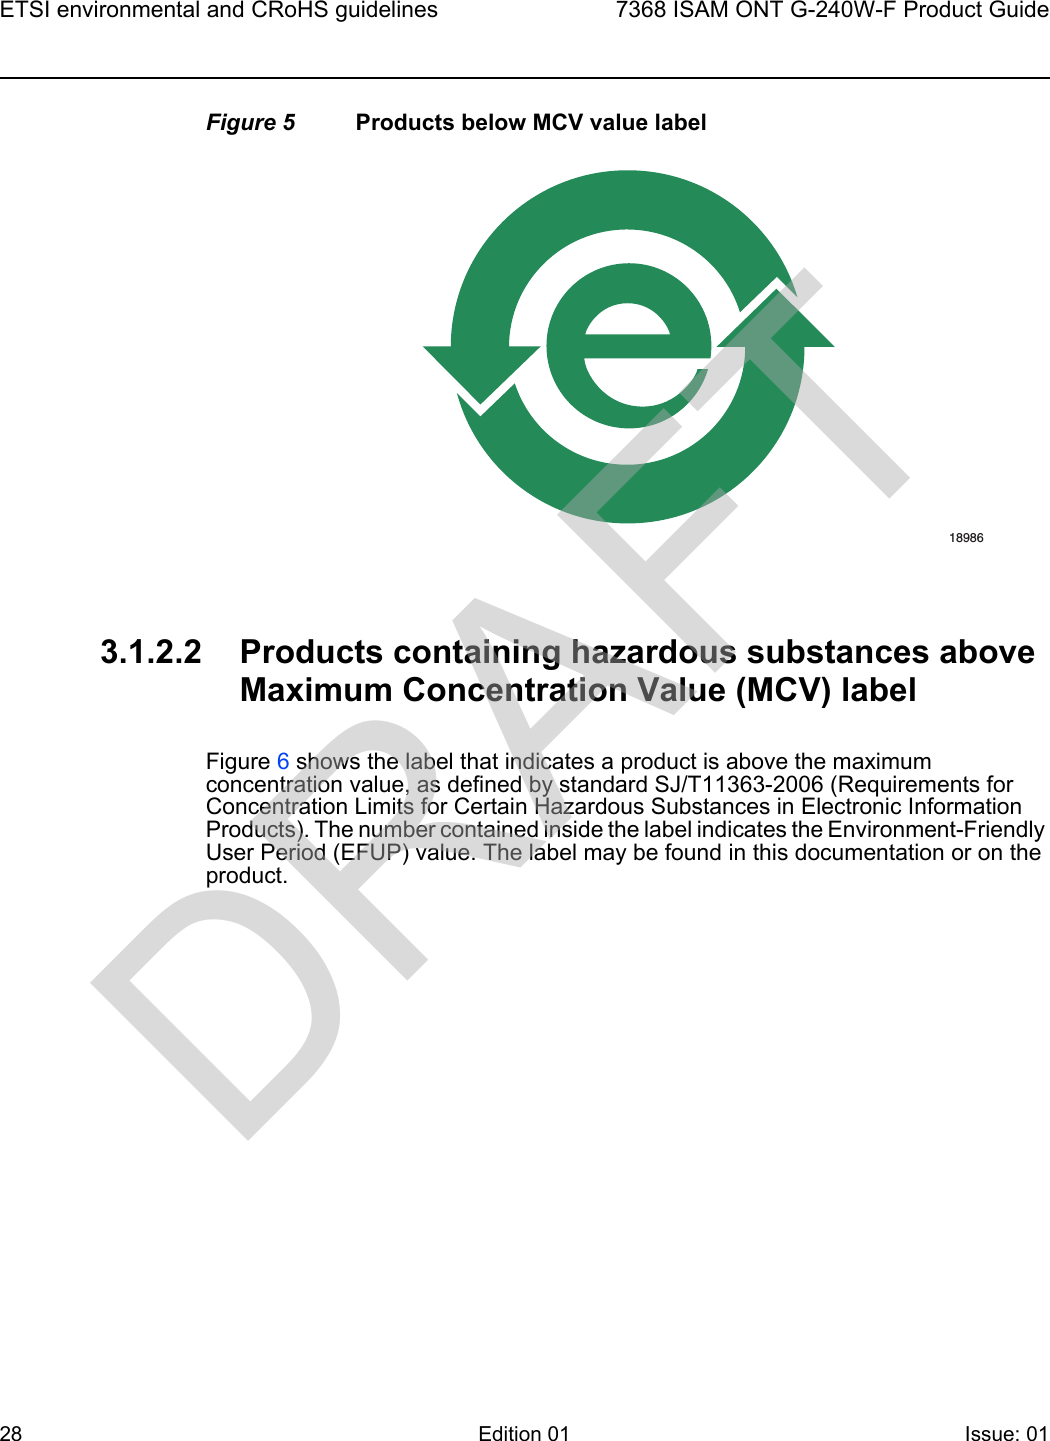 ETSI environmental and CRoHS guidelines287368 ISAM ONT G-240W-F Product GuideEdition 01 Issue: 01 Figure 5 Products below MCV value label3.1.2.2 Products containing hazardous substances above Maximum Concentration Value (MCV) labelFigure 6 shows the label that indicates a product is above the maximum concentration value, as defined by standard SJ/T11363-2006 (Requirements for Concentration Limits for Certain Hazardous Substances in Electronic Information Products). The number contained inside the label indicates the Environment-Friendly User Period (EFUP) value. The label may be found in this documentation or on the product.18986DRAFT